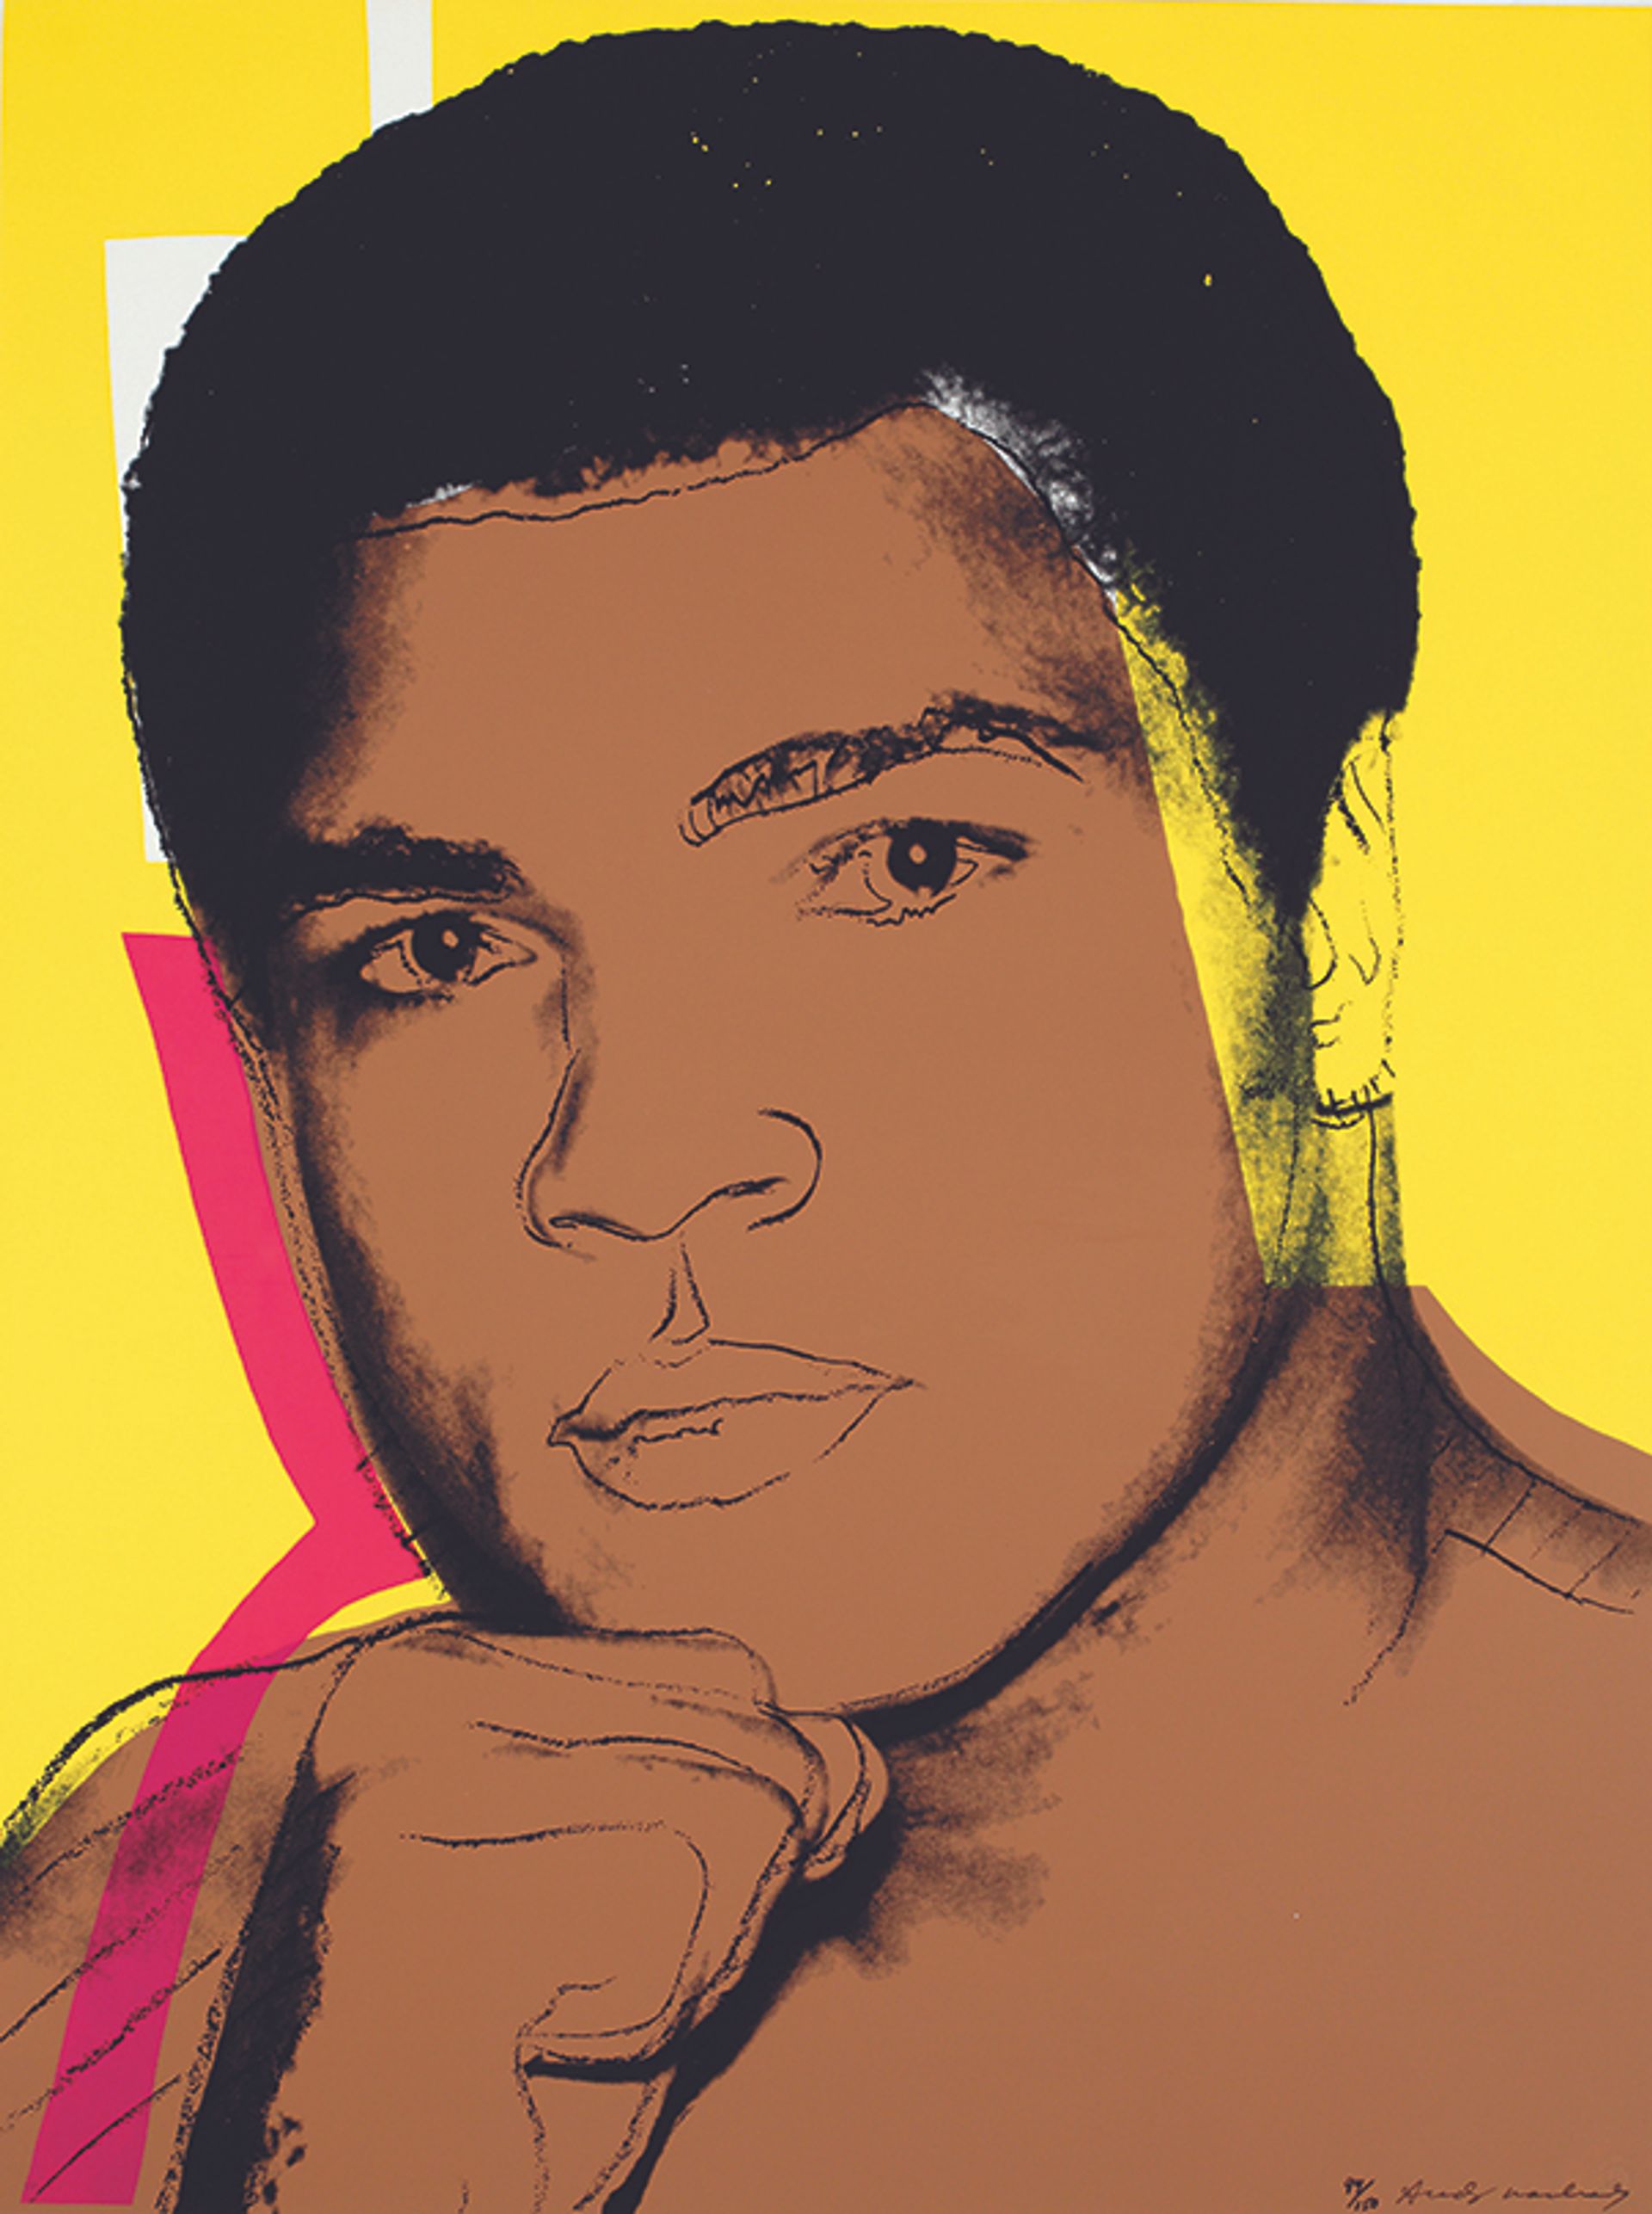 World famous for a great deal longer than 15 minutes: Andy Warhol’s Muhammad Ali screen print (1978)

© Andy Warhol Foundation for the Visual Arts